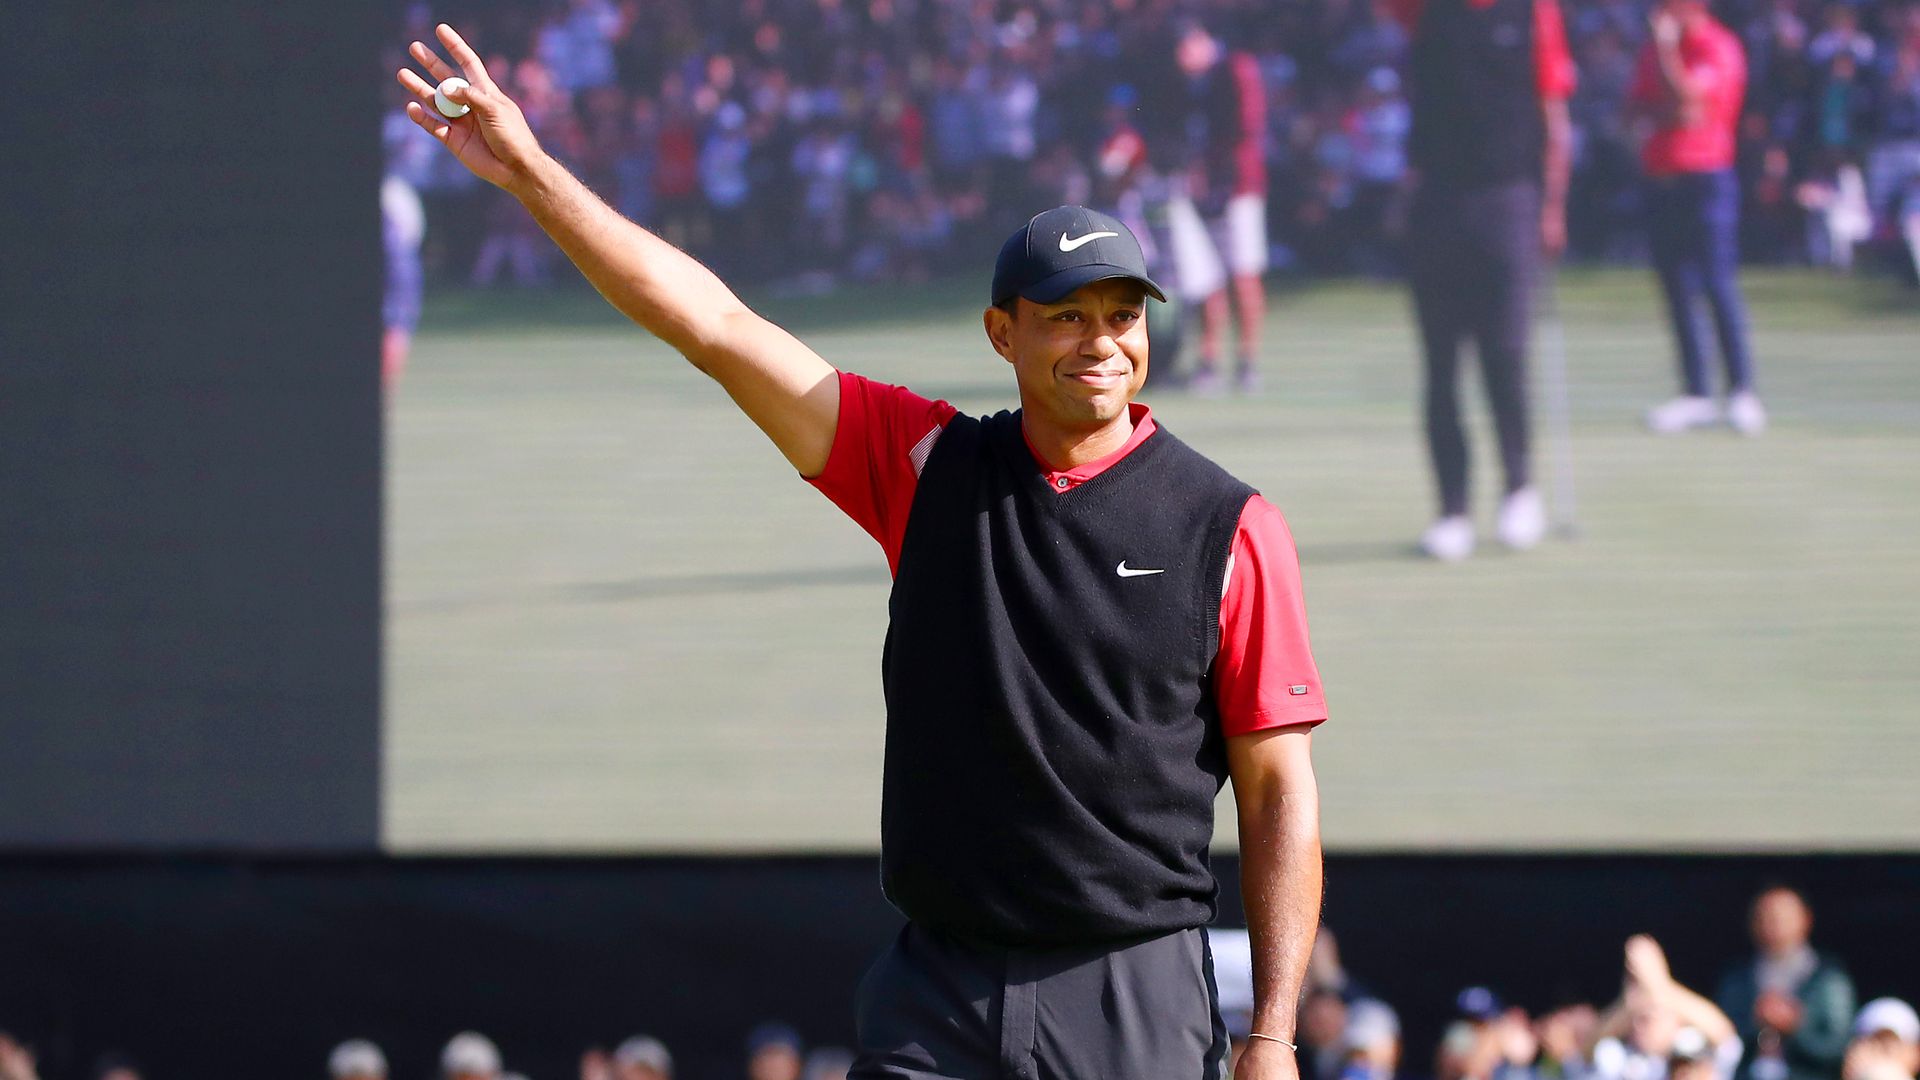 Tiger Woods of the United States celebrates winning the tournament on the 18th green during the final round of the Zozo Championship at Accordia Golf Narashino Country Club on October 28